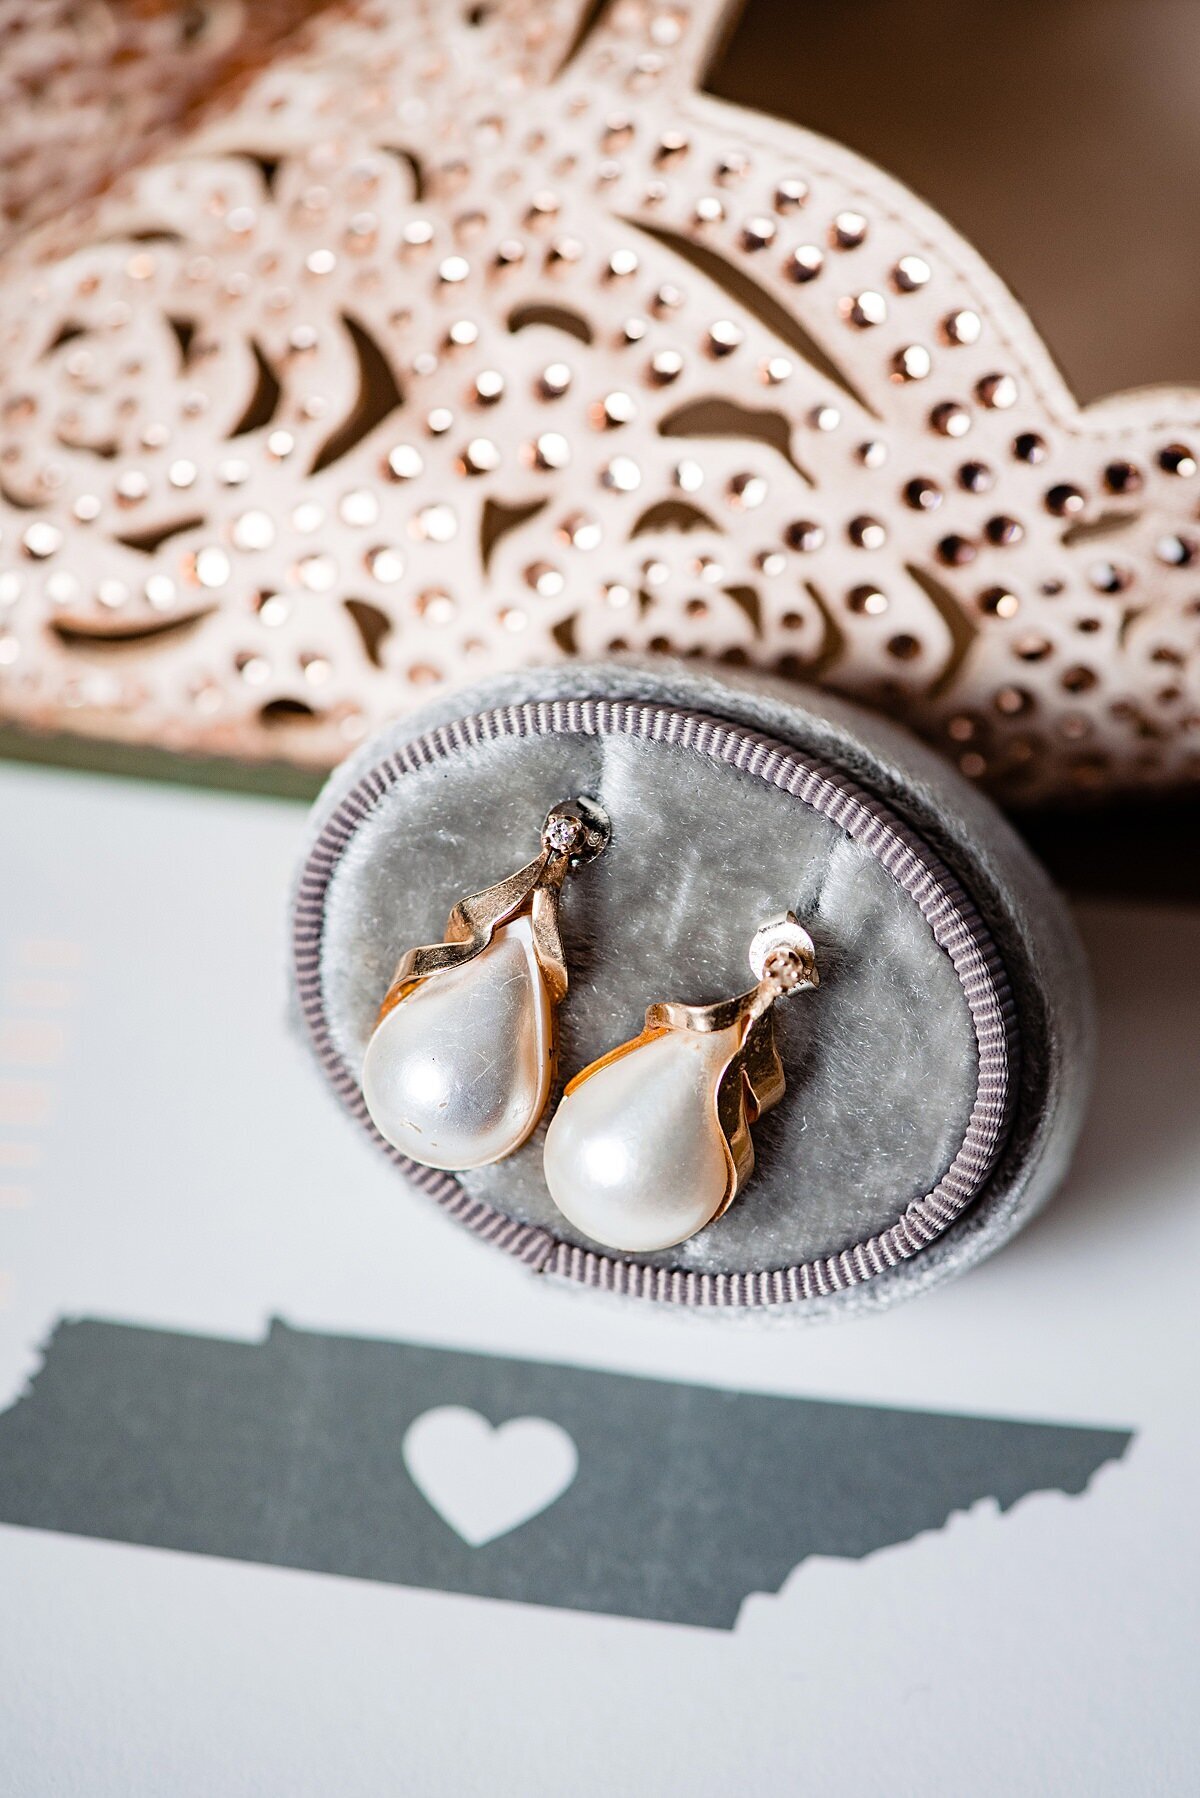 Detail photo of the pearl and gold earrings the bride will wear on her wedding day as well as her ivory filigree patterned leather heels. The state of Tennessee with a heart over Murfreesboro in gray.